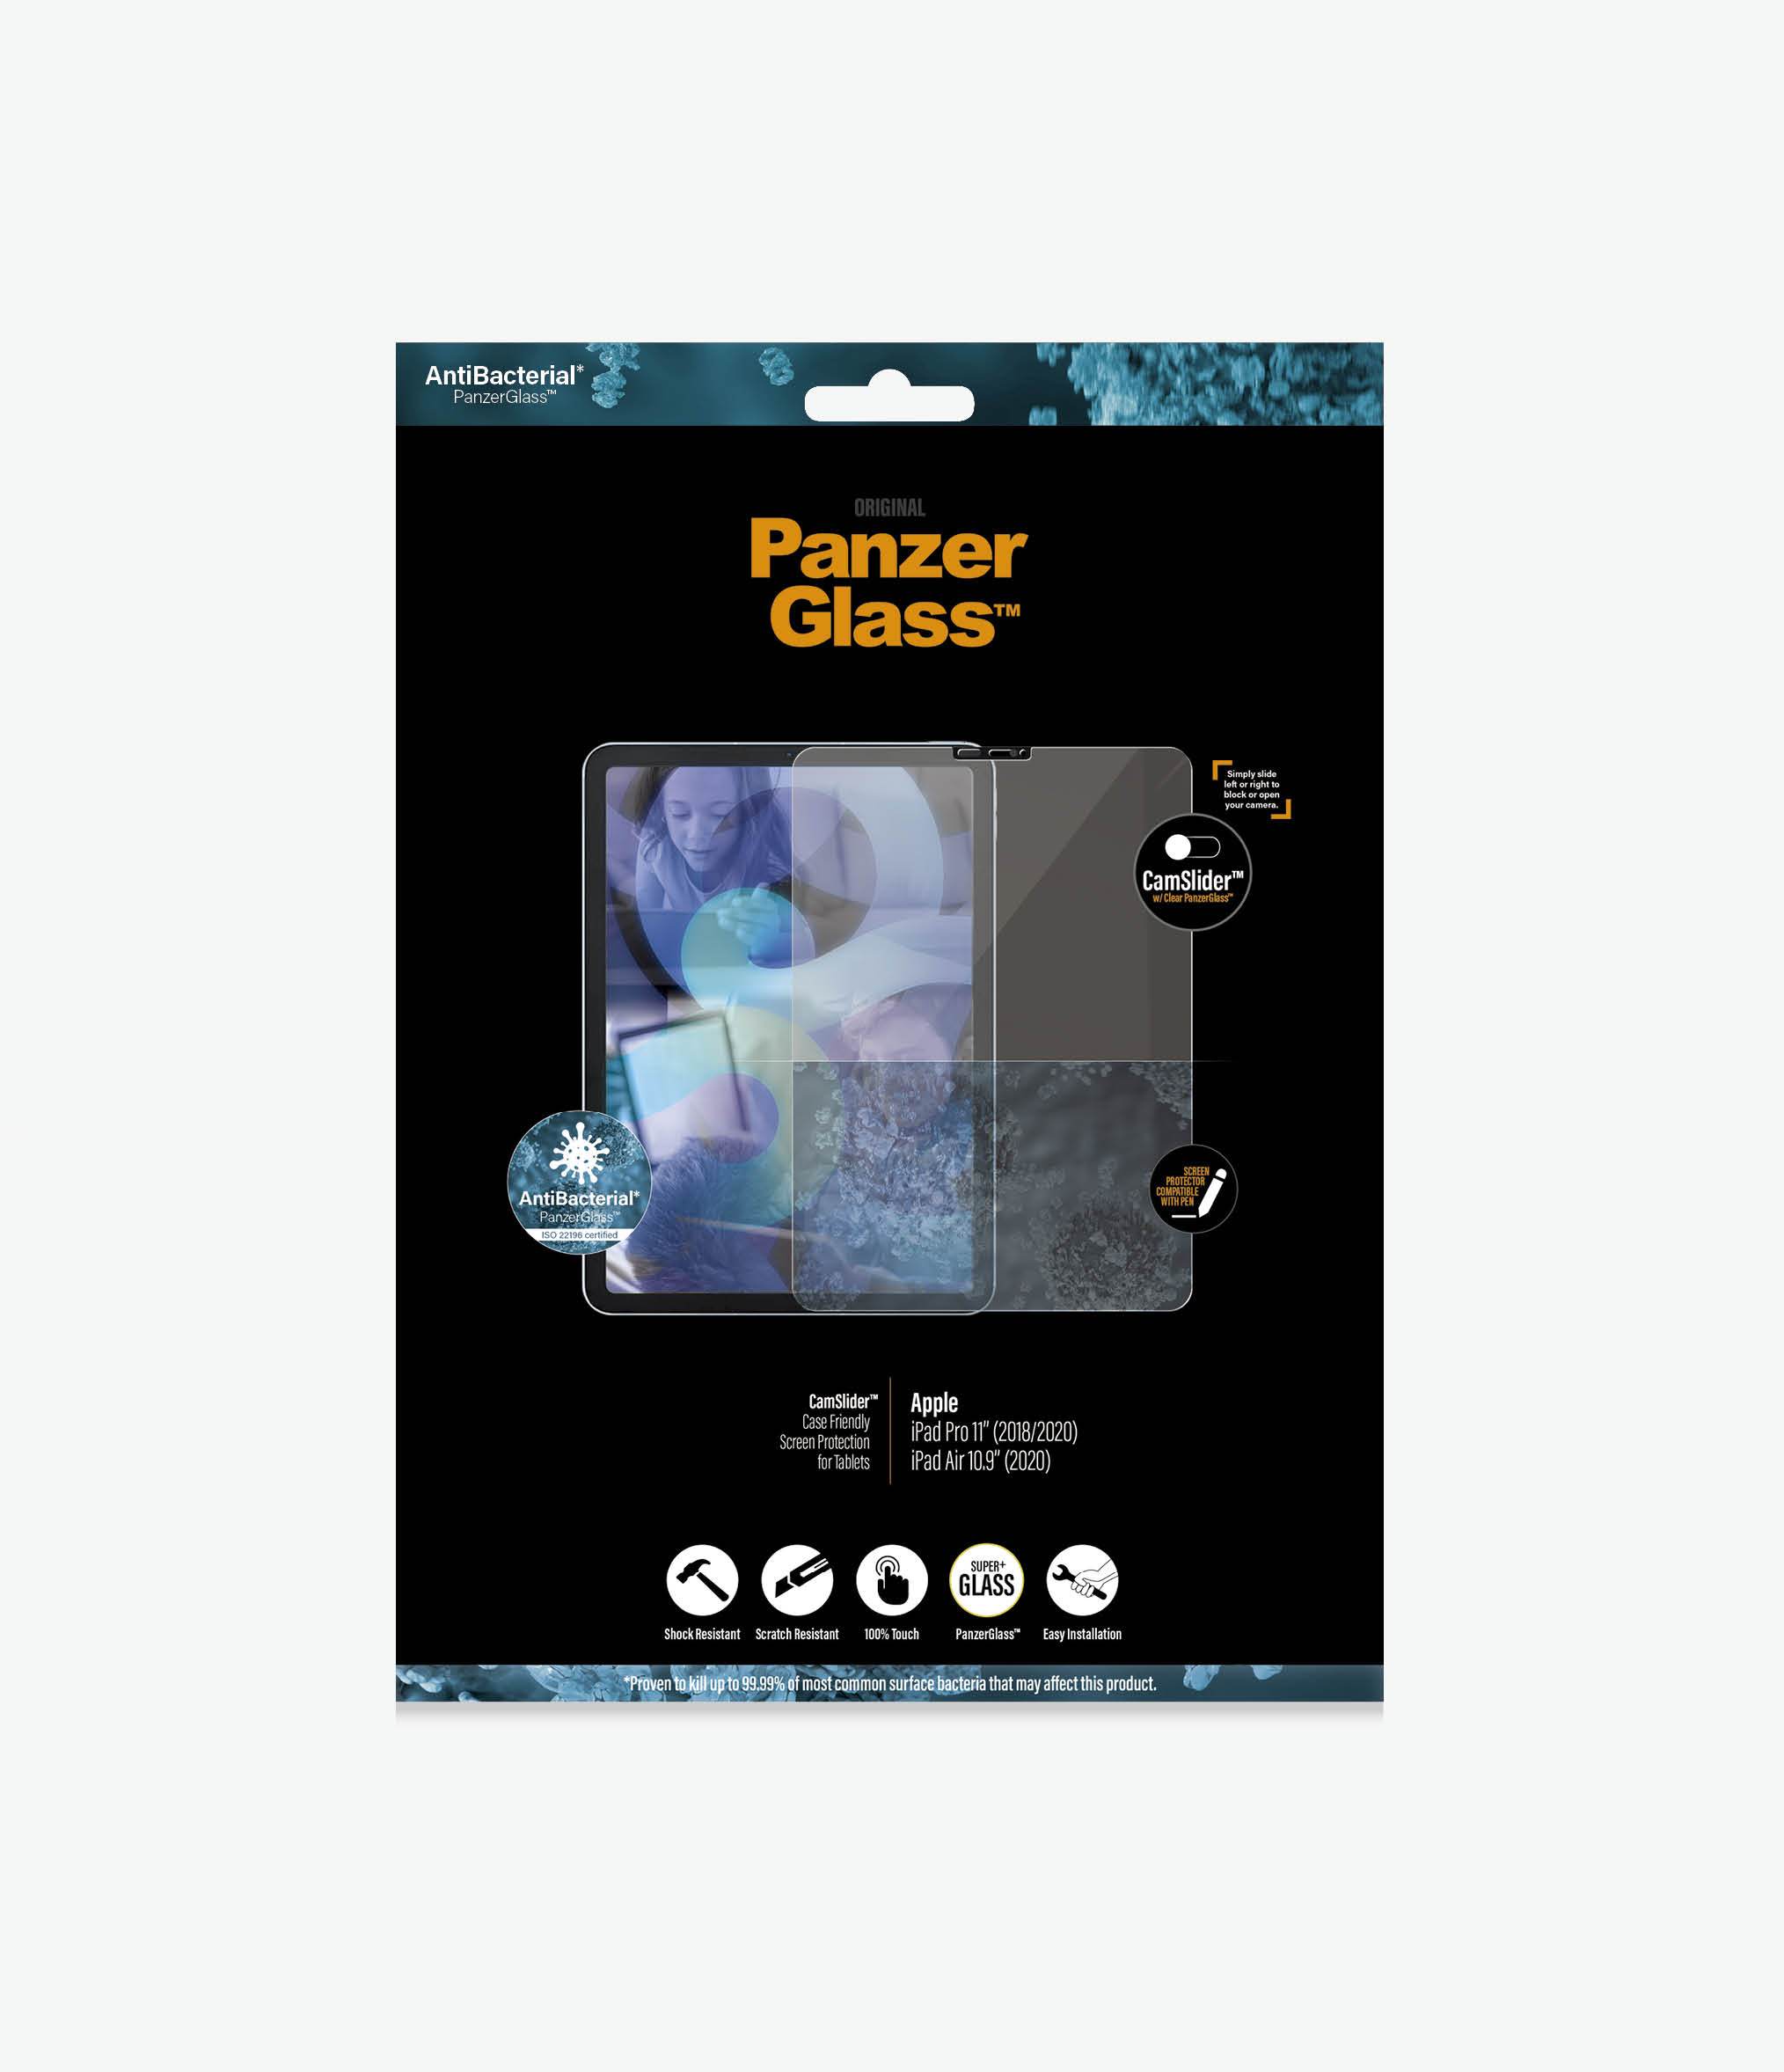 PanzerGlass™ Apple iPad Pro 11' (2018/2020/2021) & iPad Air (2020) - CamSlider® - (2702) - Screen Protector - Rounded edges, 100% touch preservation